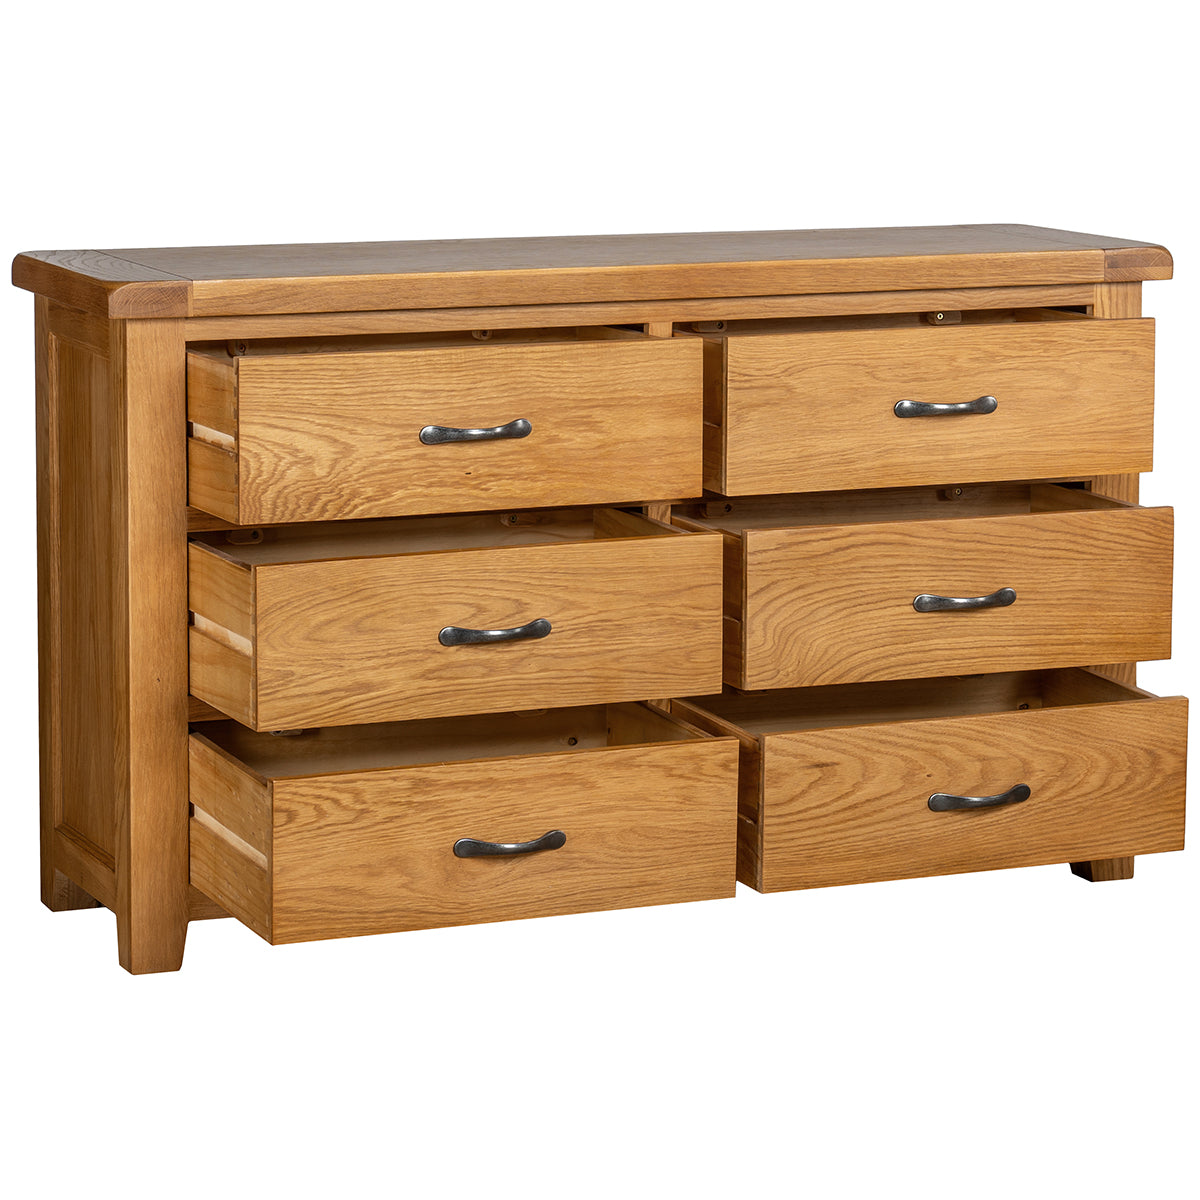 a brown wooden dresser with a wooden trunk 